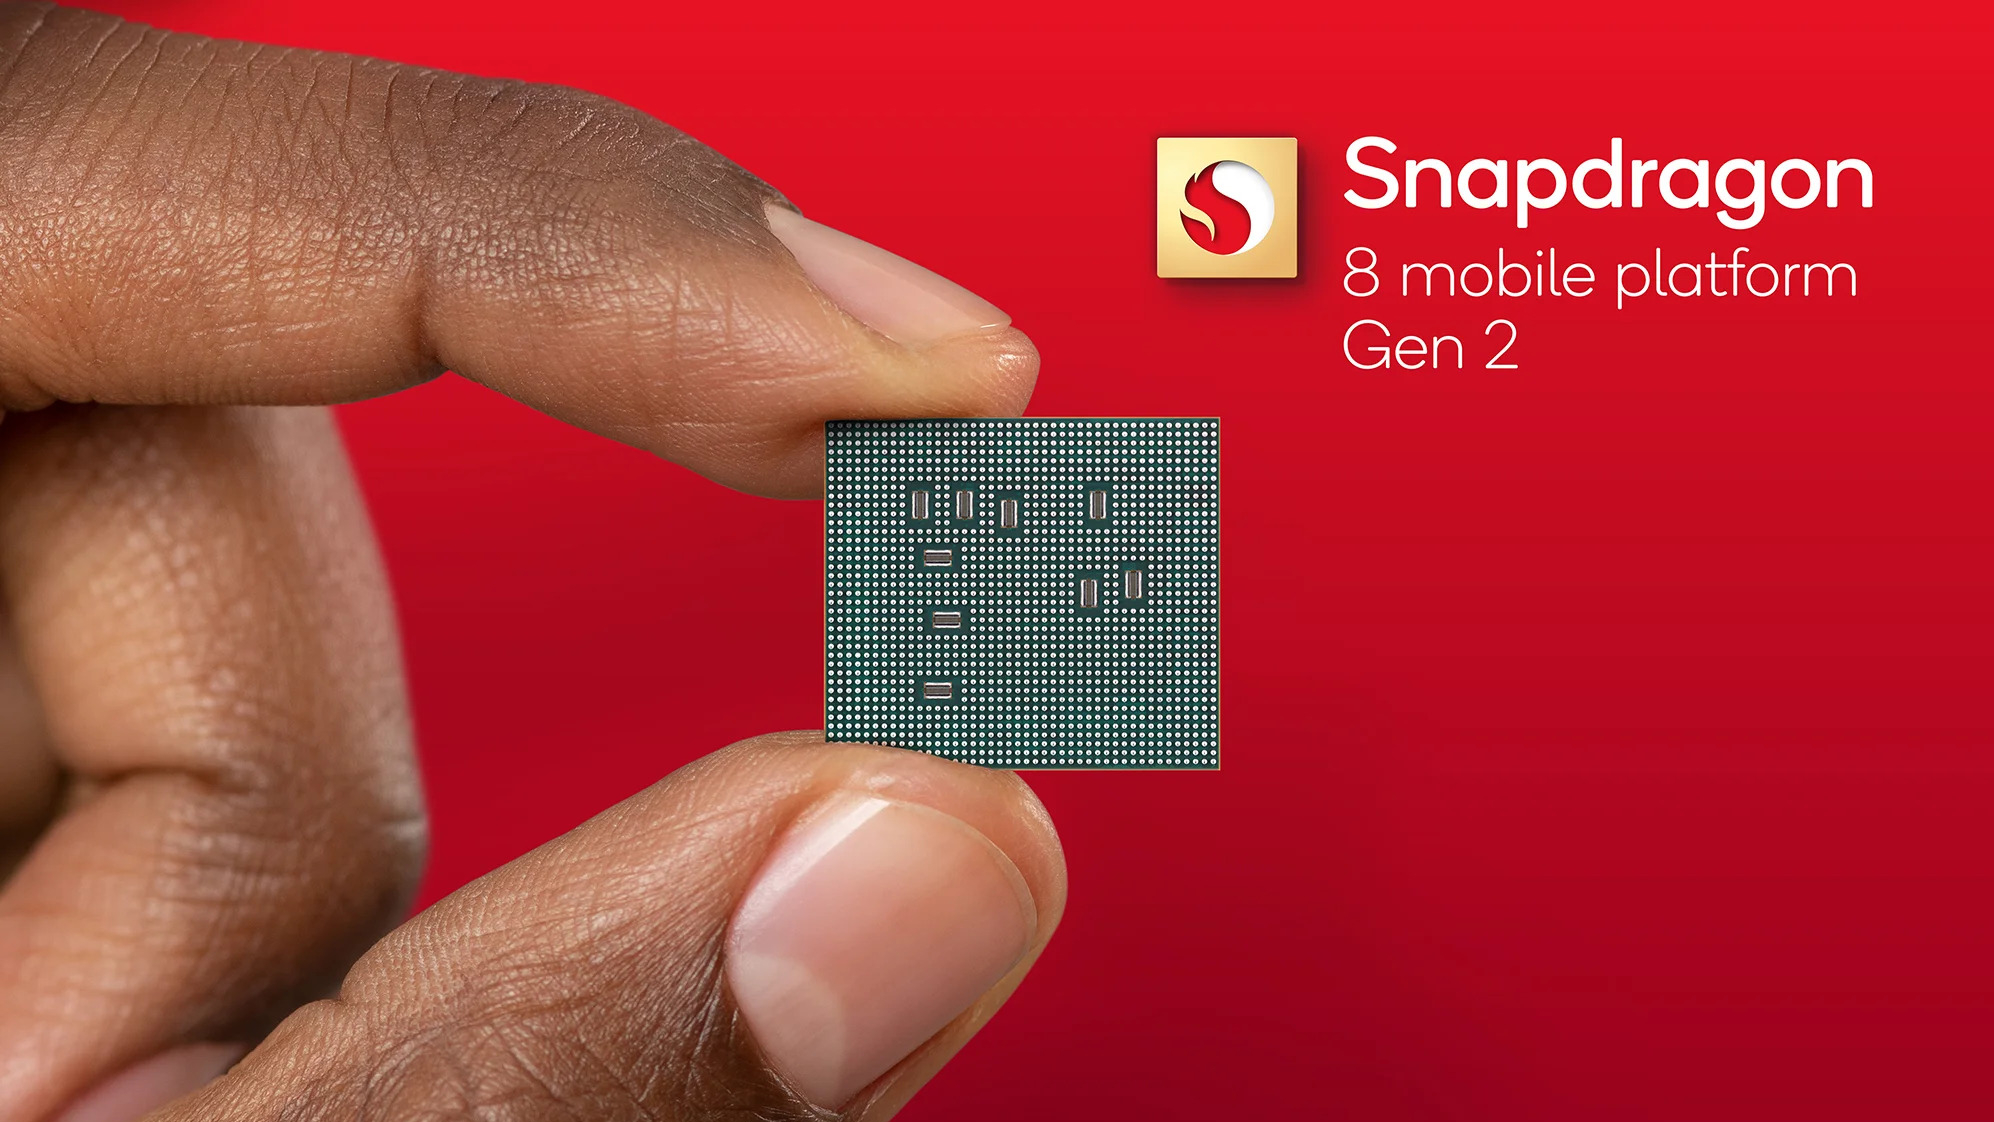 Photo of fingers holding the Qualcomm Snapdragon 8 Gen 2 chip against a red background